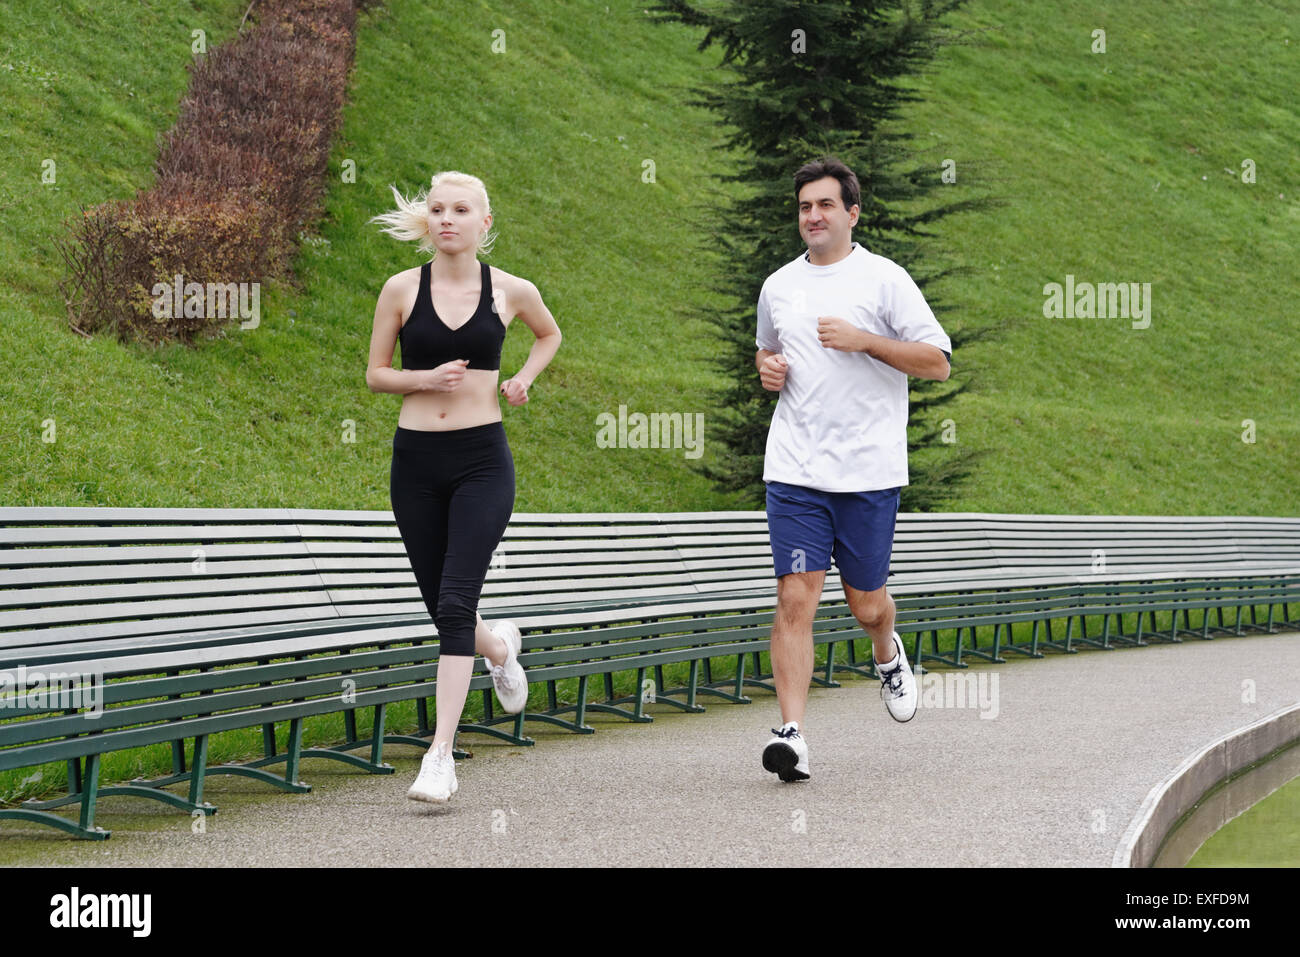 Man and woman running on pathway beside lake Stock Photo